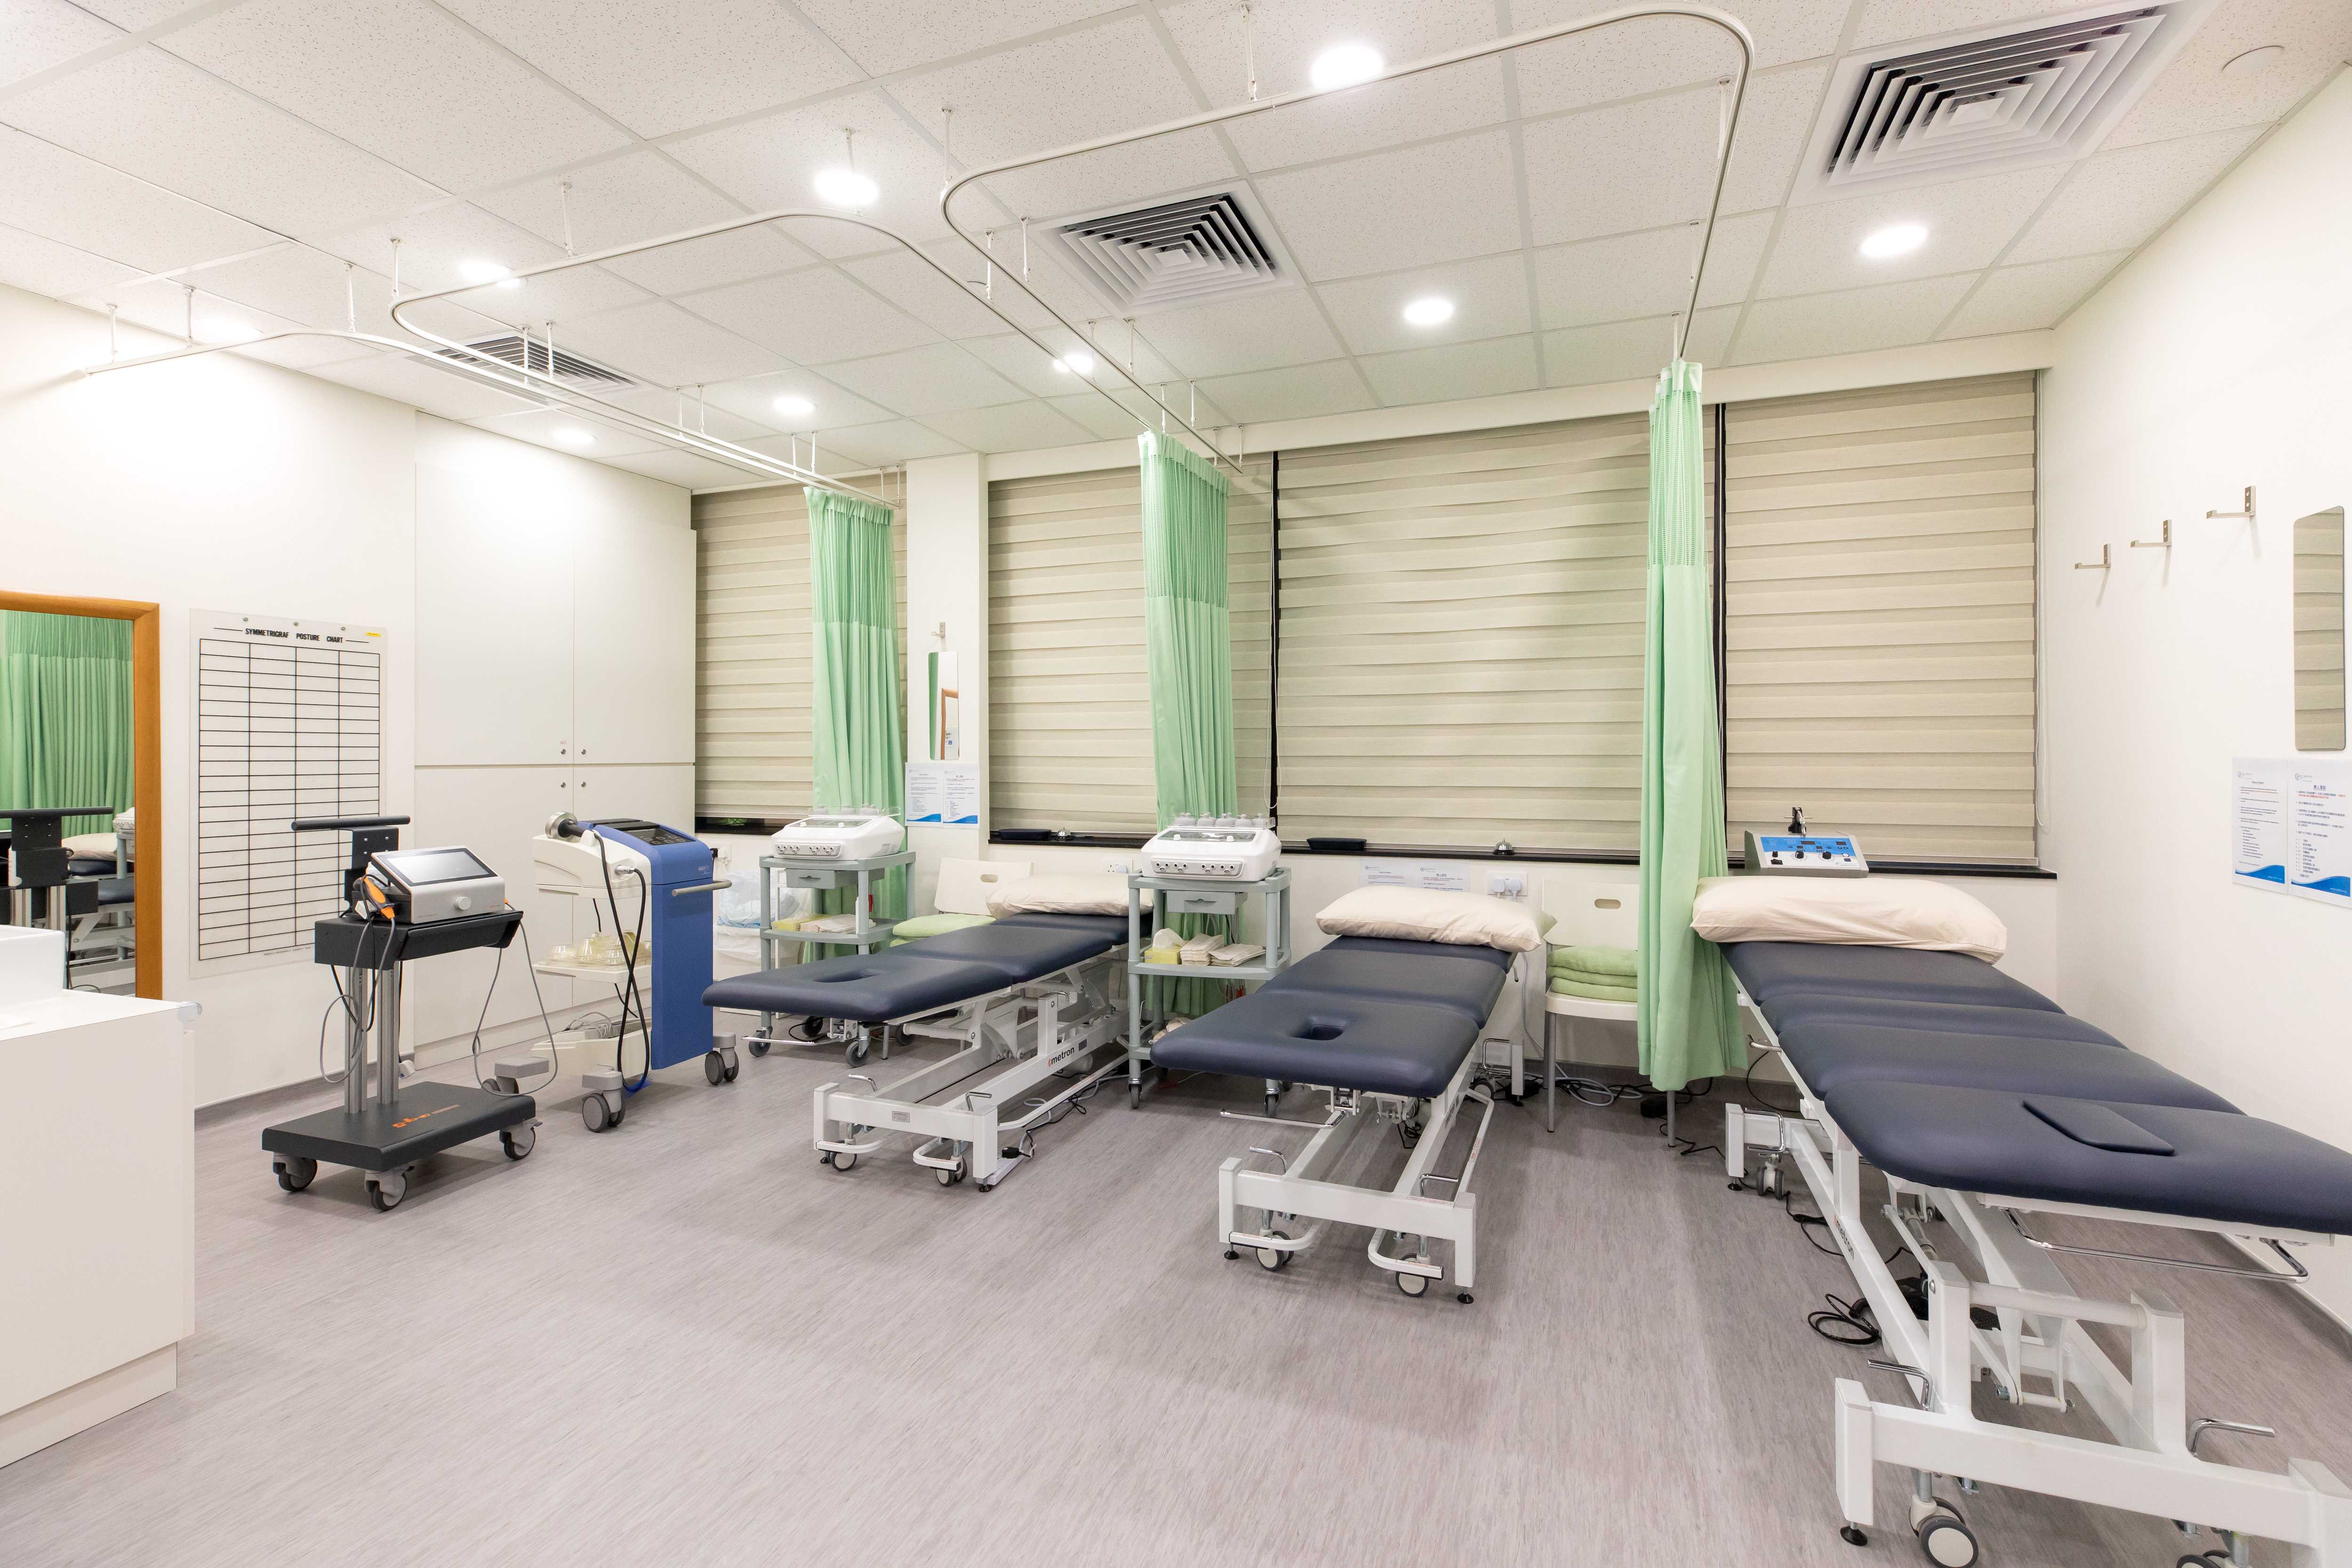 Three physiotherapy beds in a large room that can be divided with curtains